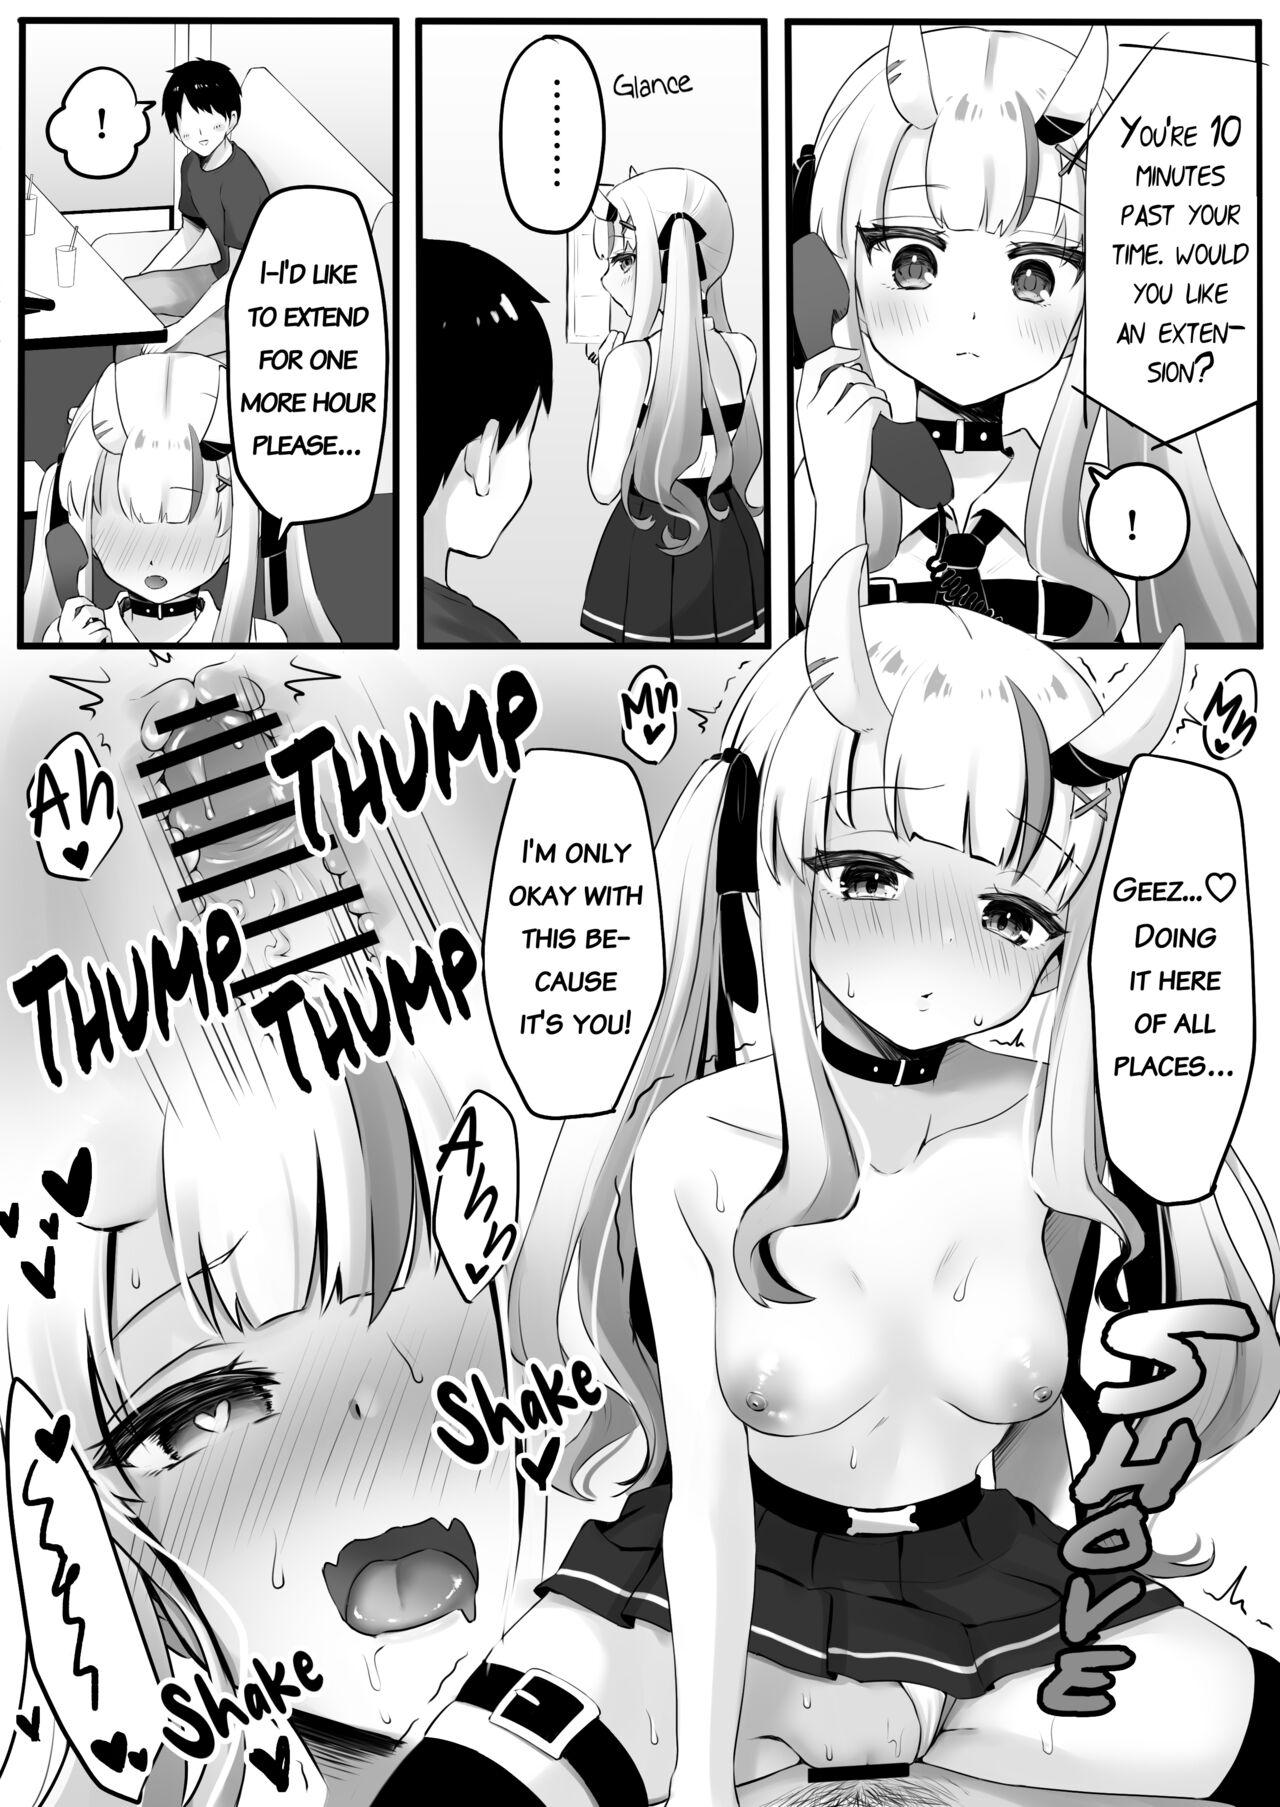 Taboo あ〇めとカラオケ【イチャラブver】／Karaoke and sex with ayame - Hololive Sucking Dick - Page 5